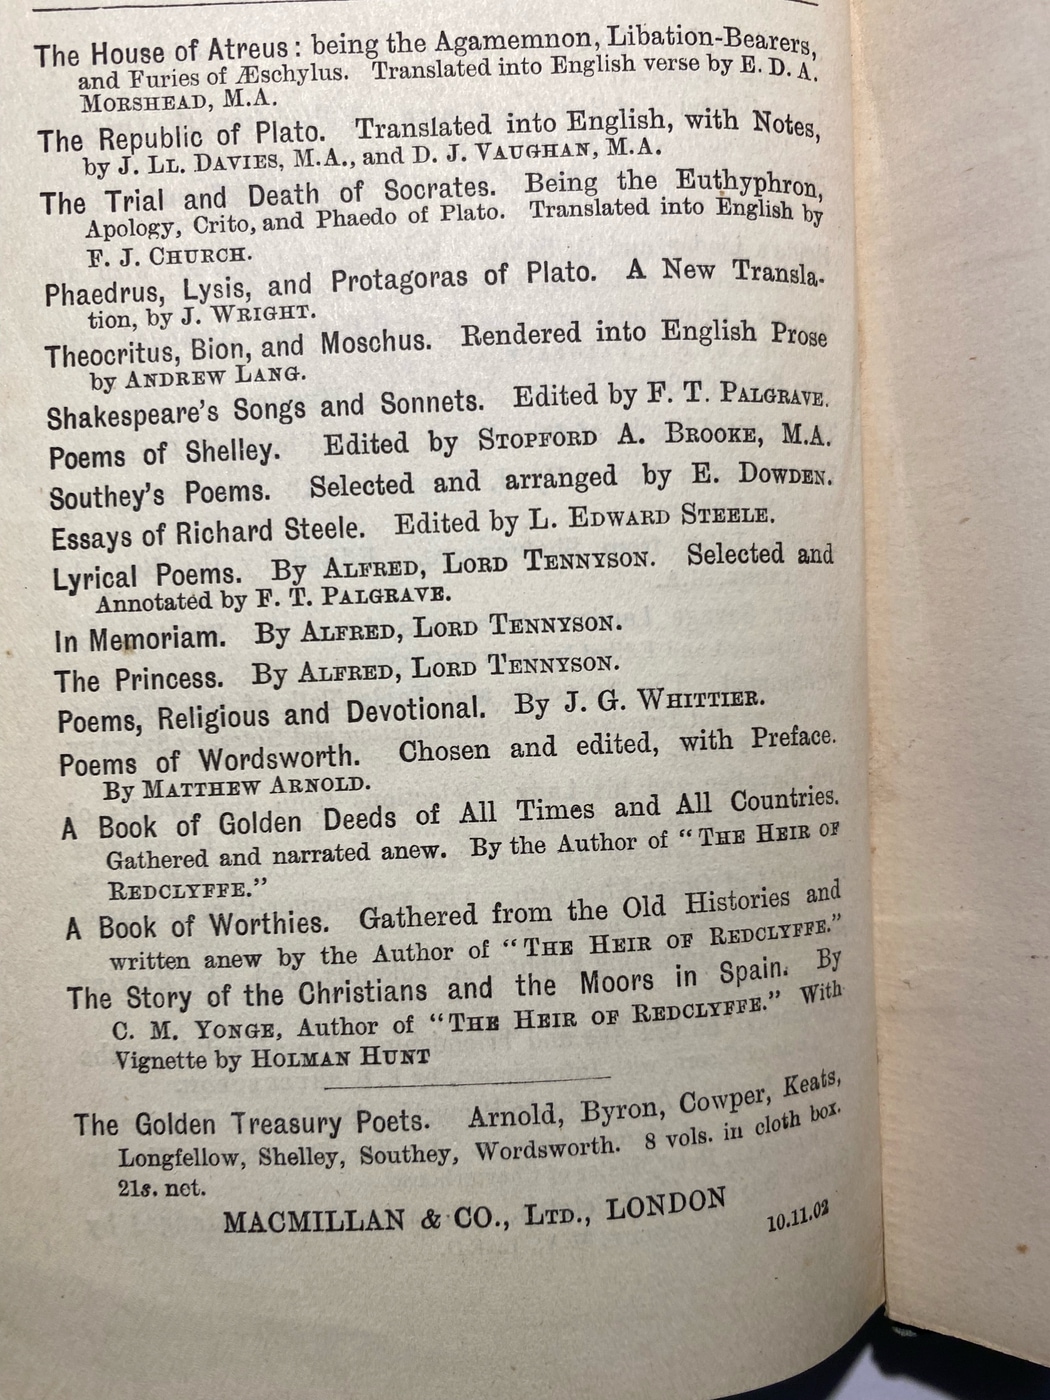 Series list from the publisher, Final Page